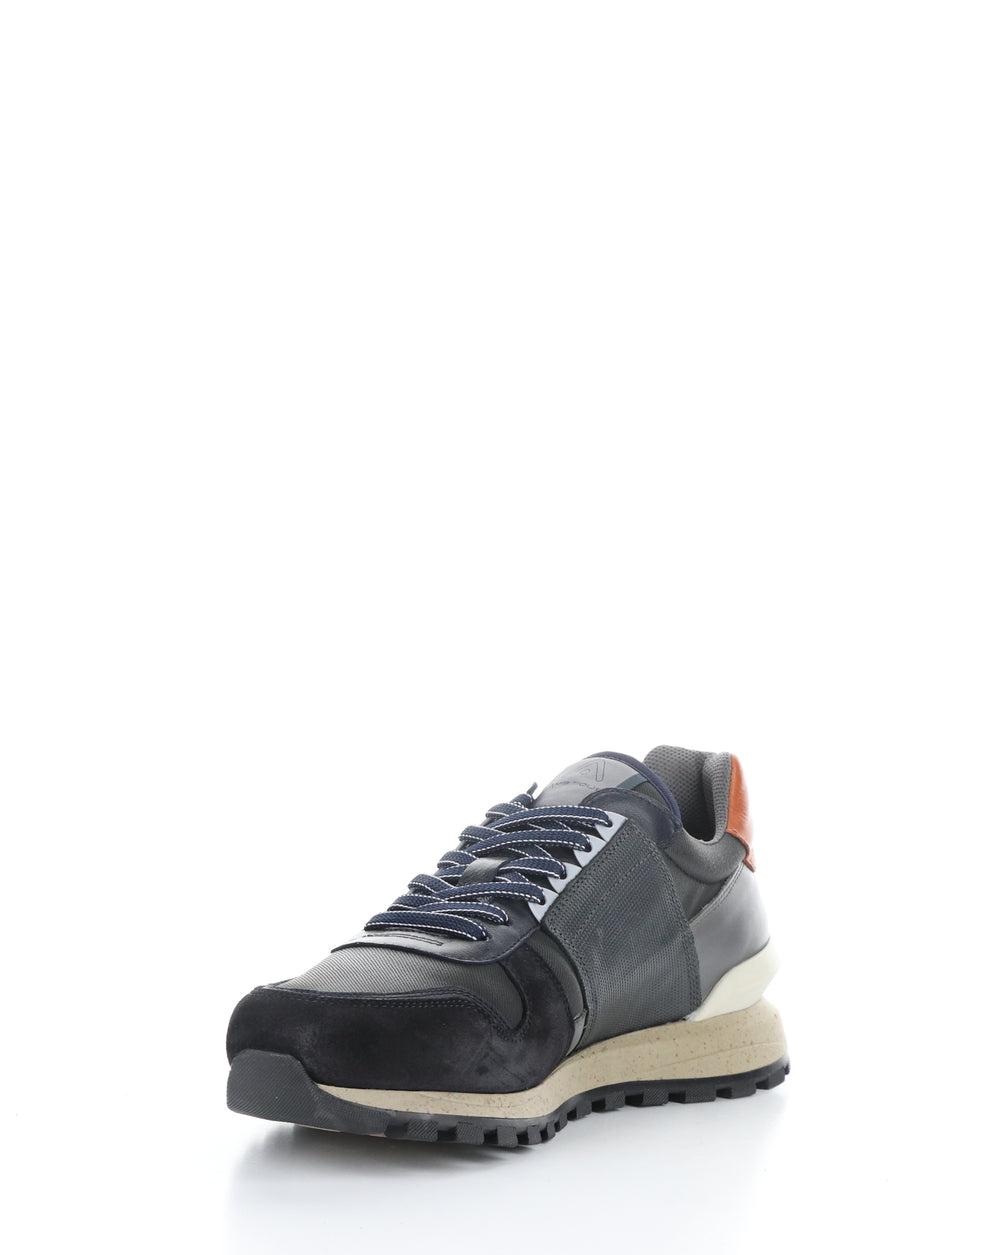 11774A NAVY/GREY COMBI Lace-up Shoes